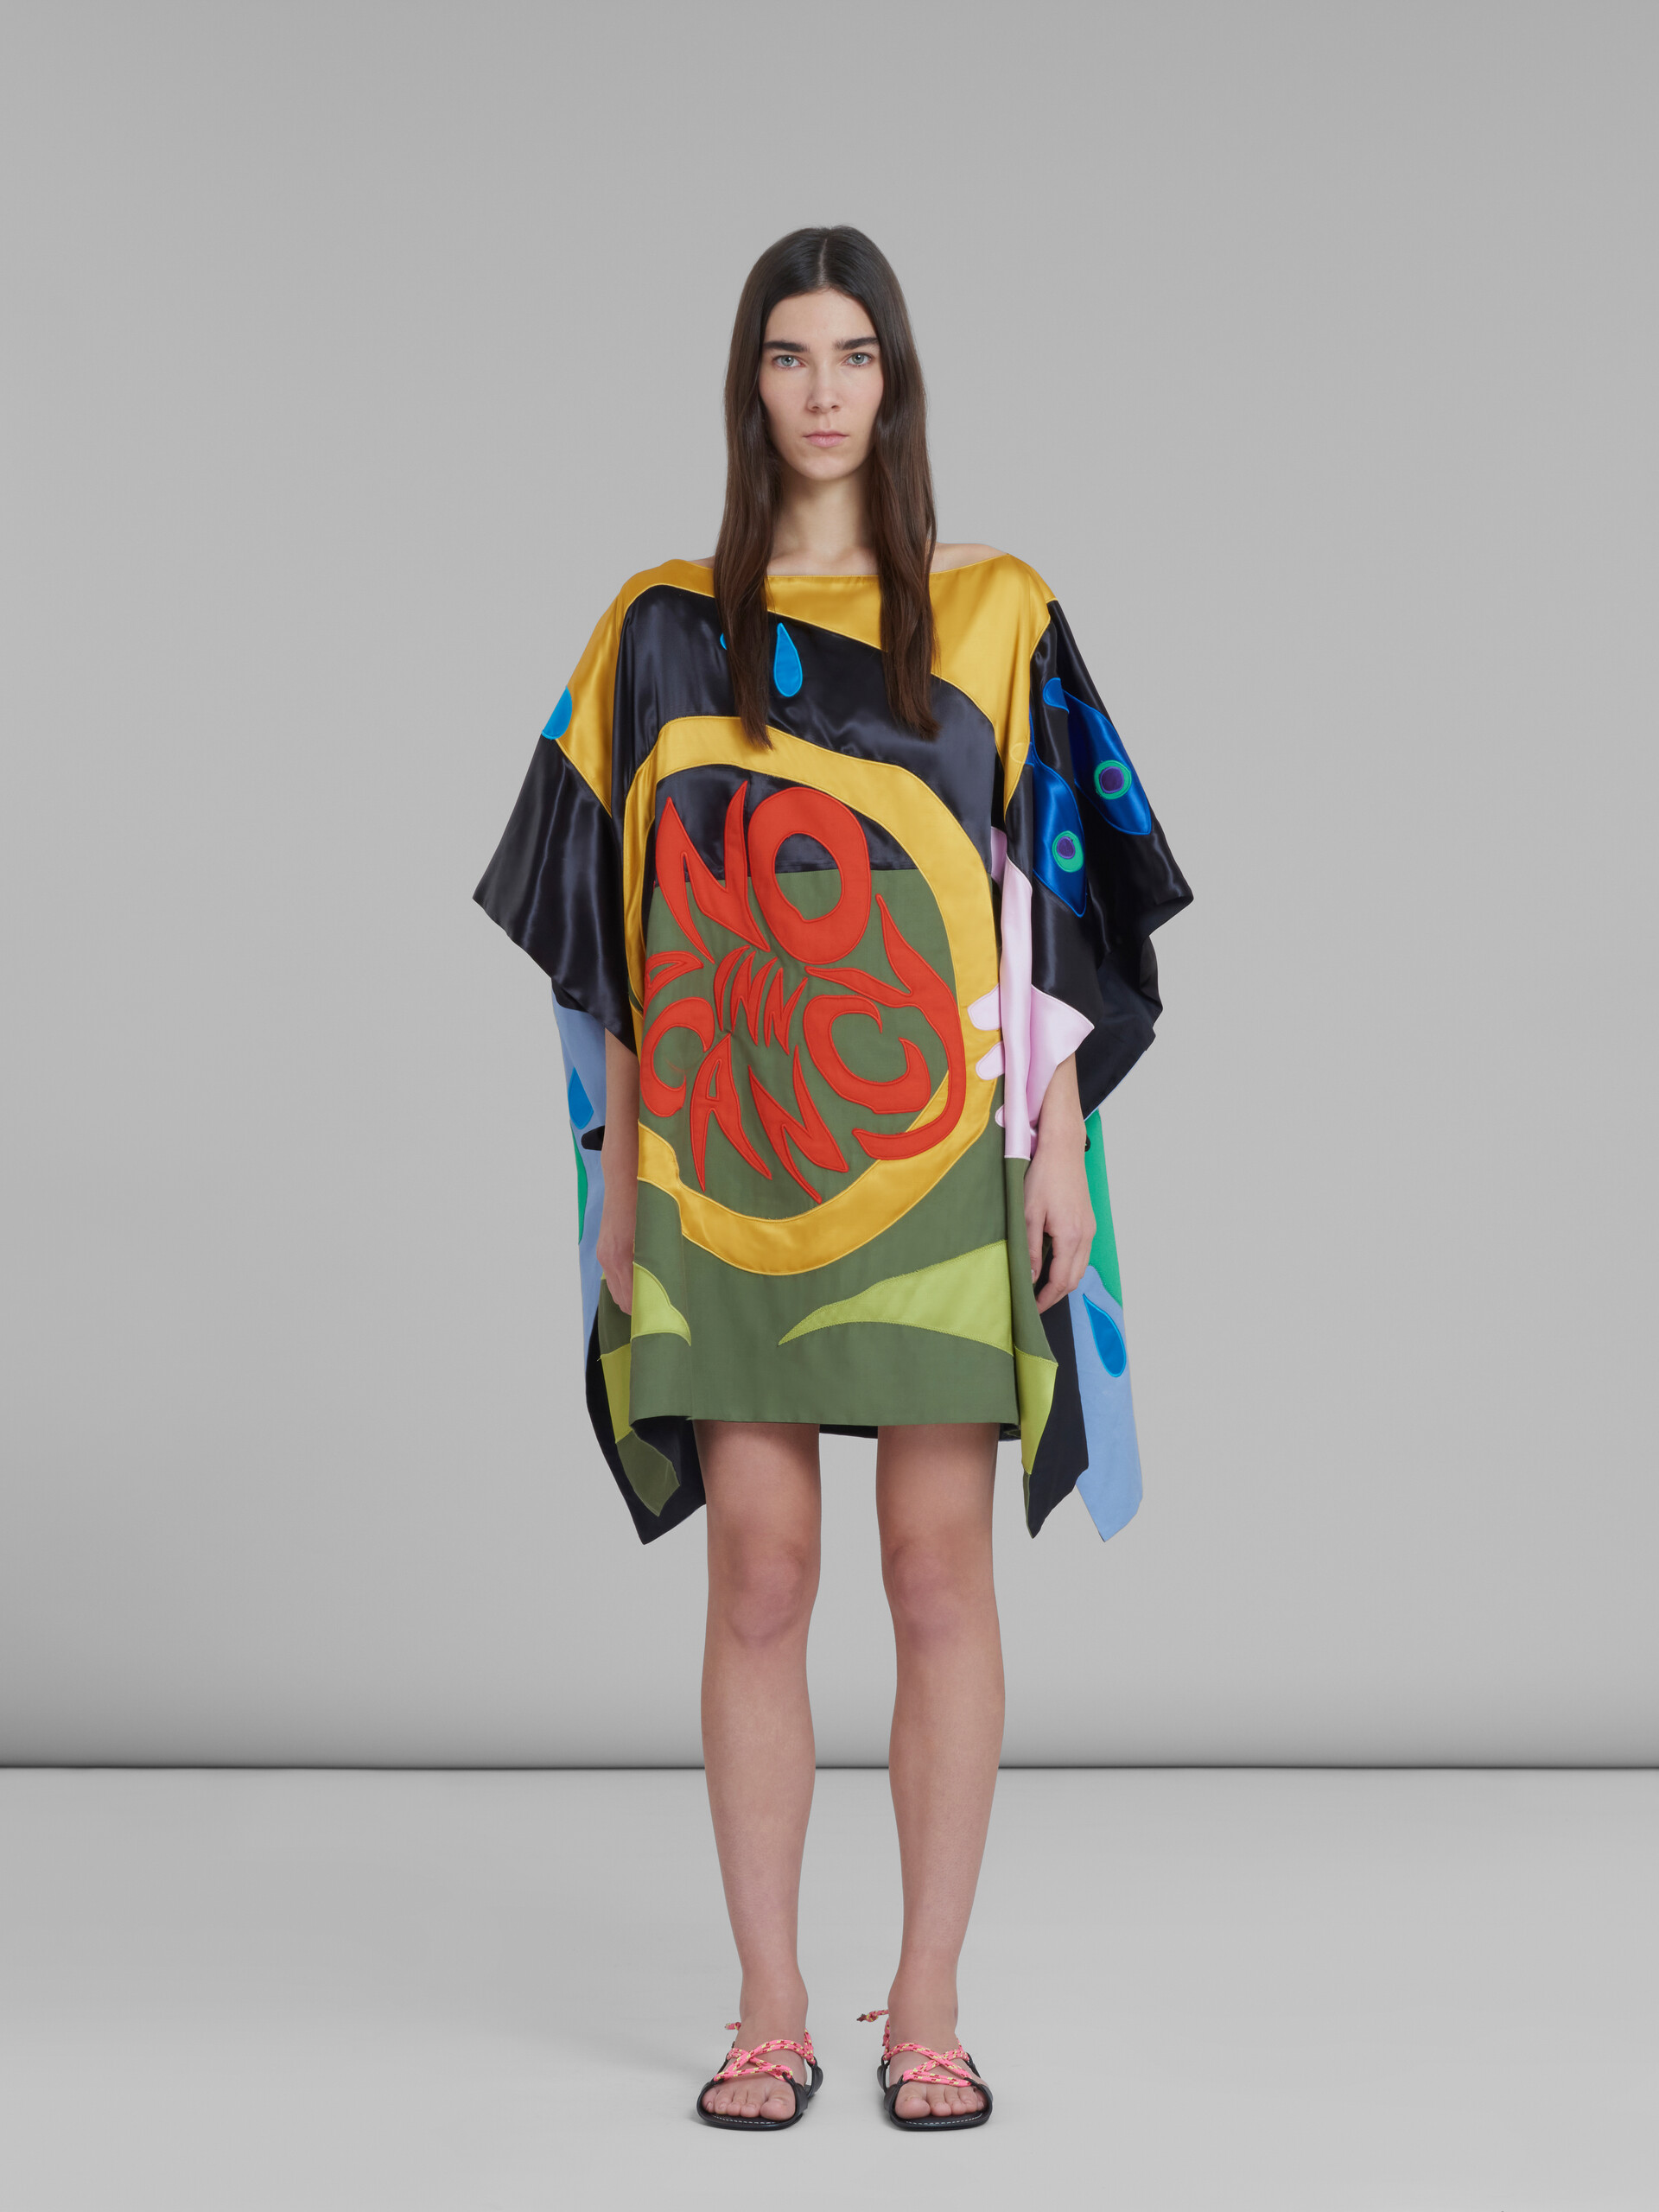 Marni x No Vacancy Inn - Cape top with multicolour patchwork motifs - Shirts - Image 2